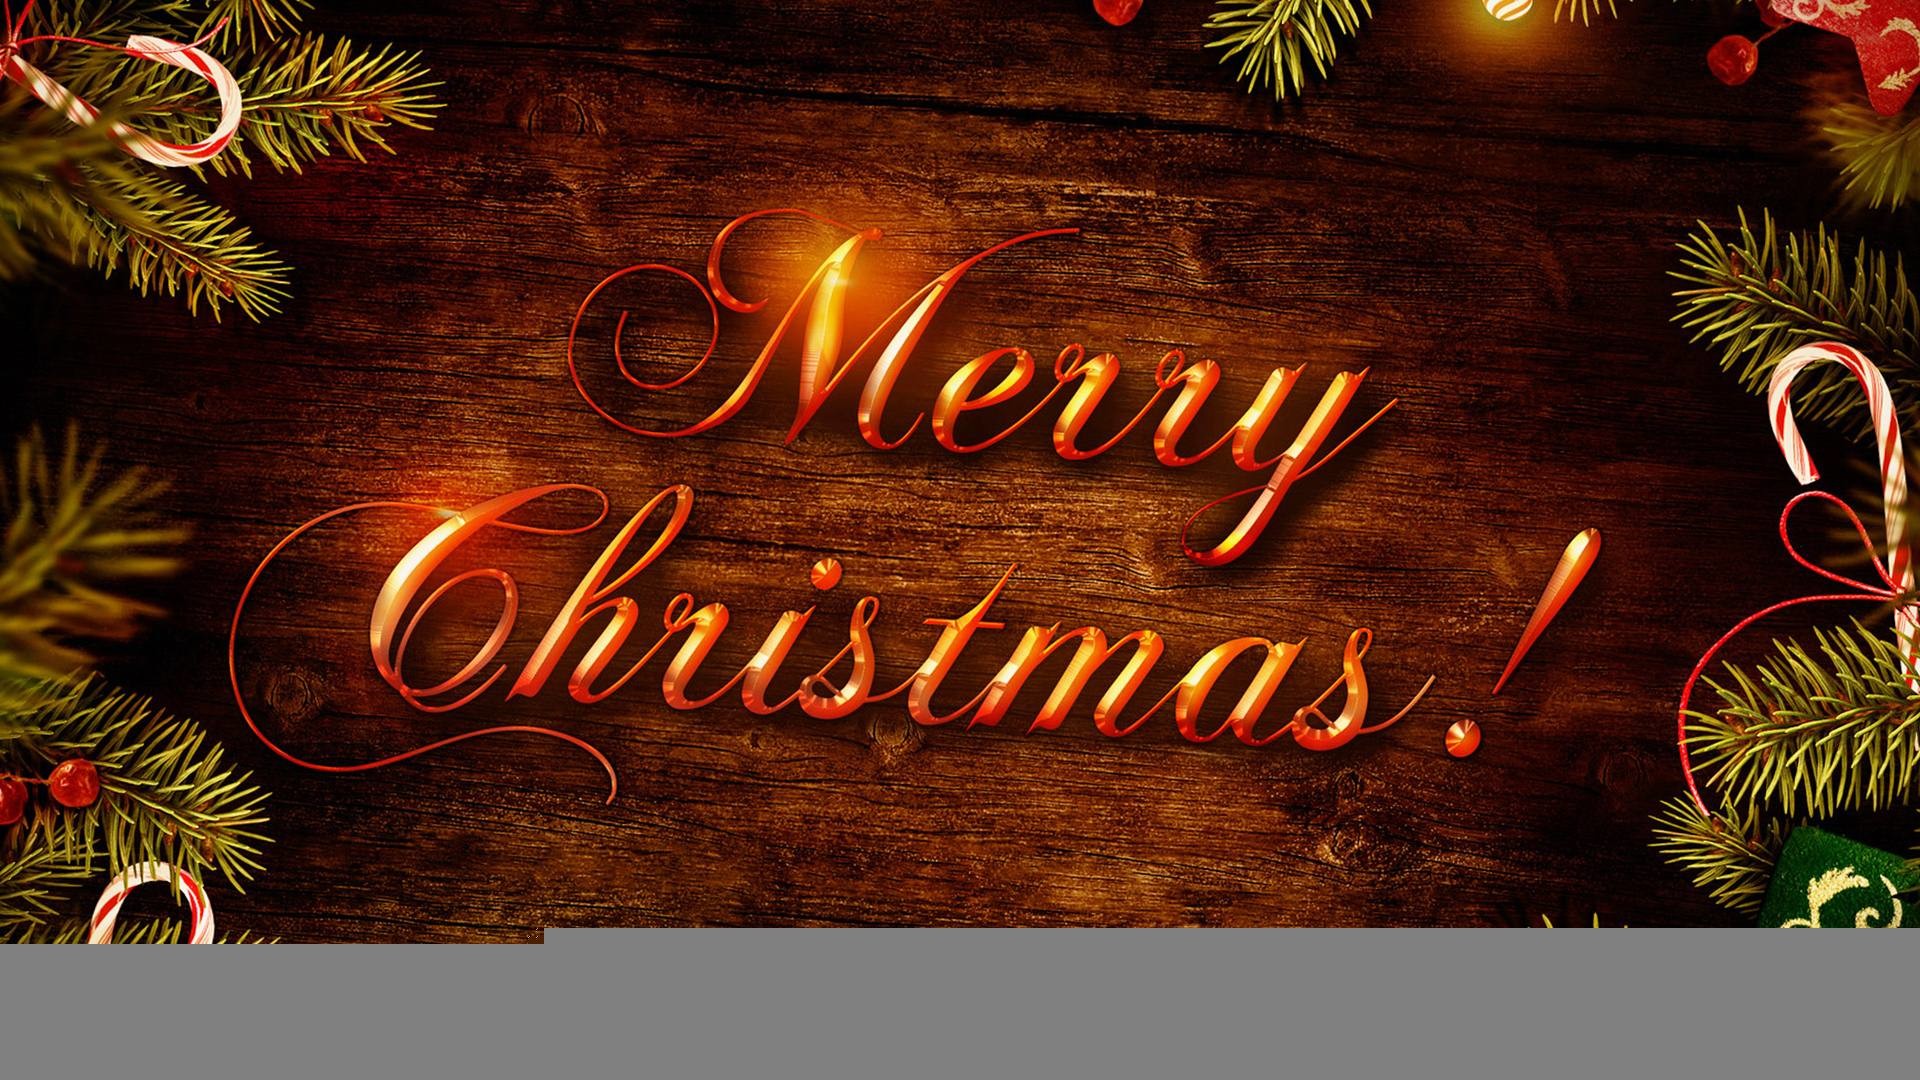 1920x1080 ... HD Wallpapers Merry Christmas Wishes Wallpapers funny pics ...